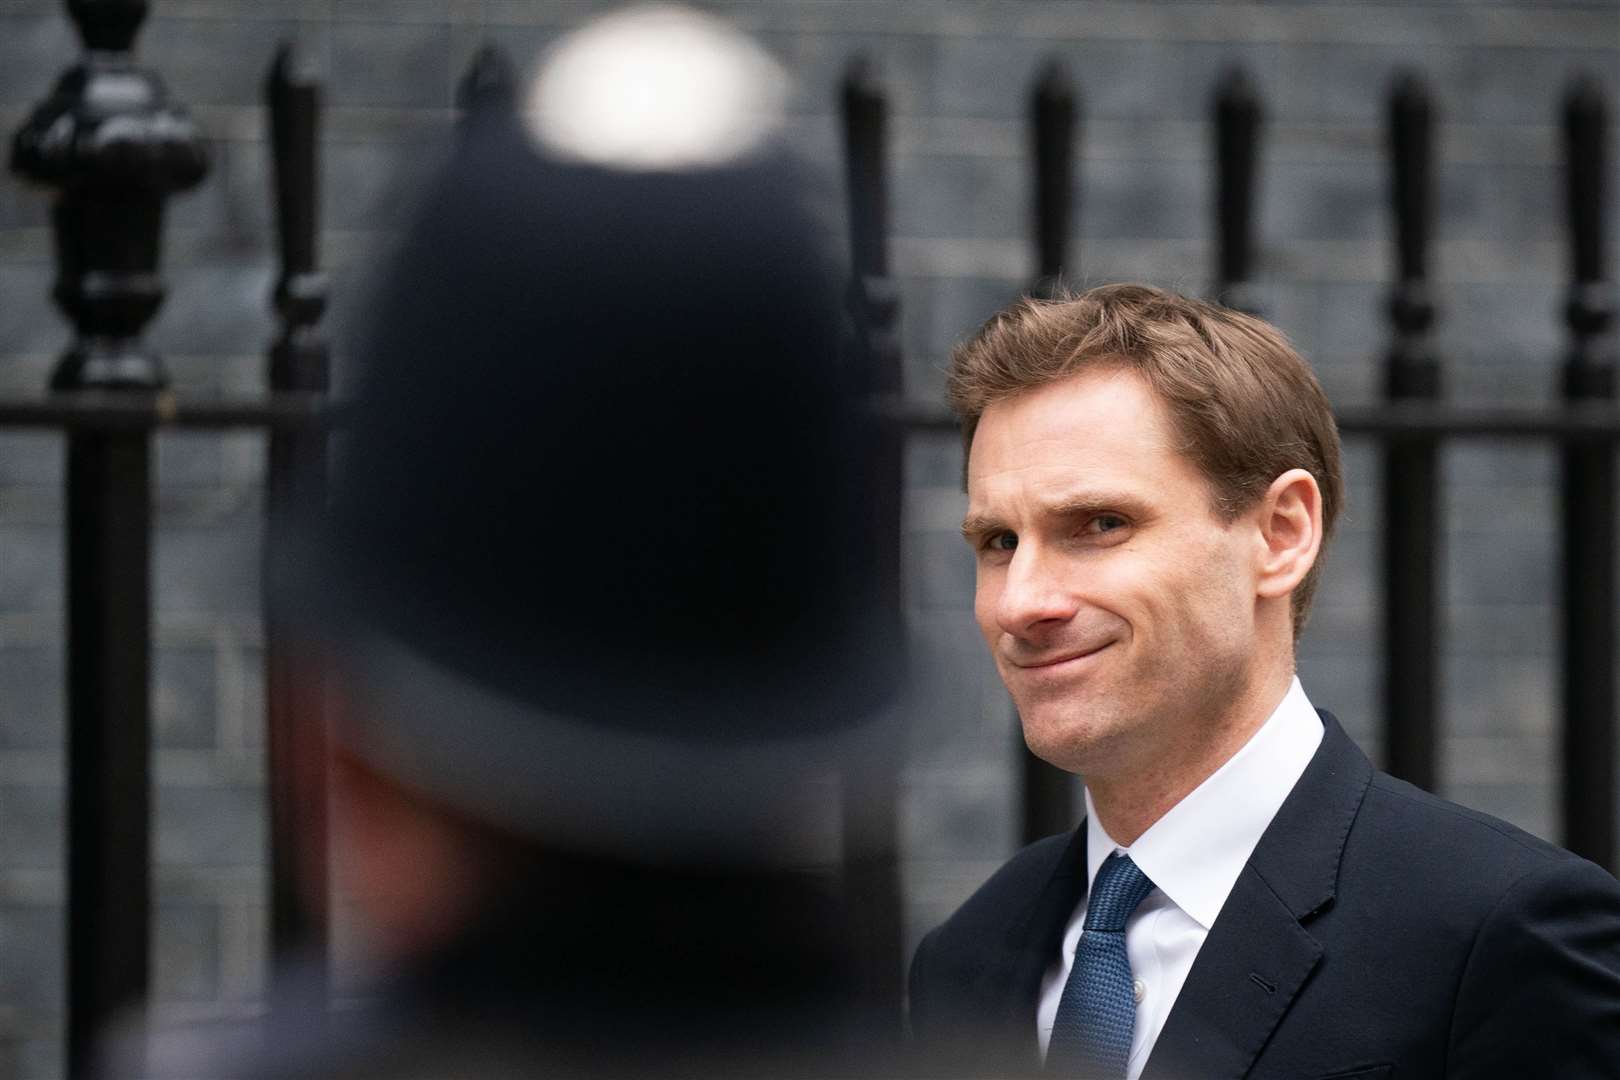 Home Office minister Chris Philp said ‘only the Conservatives have a plan to tackle crime’ (James Manning/PA)